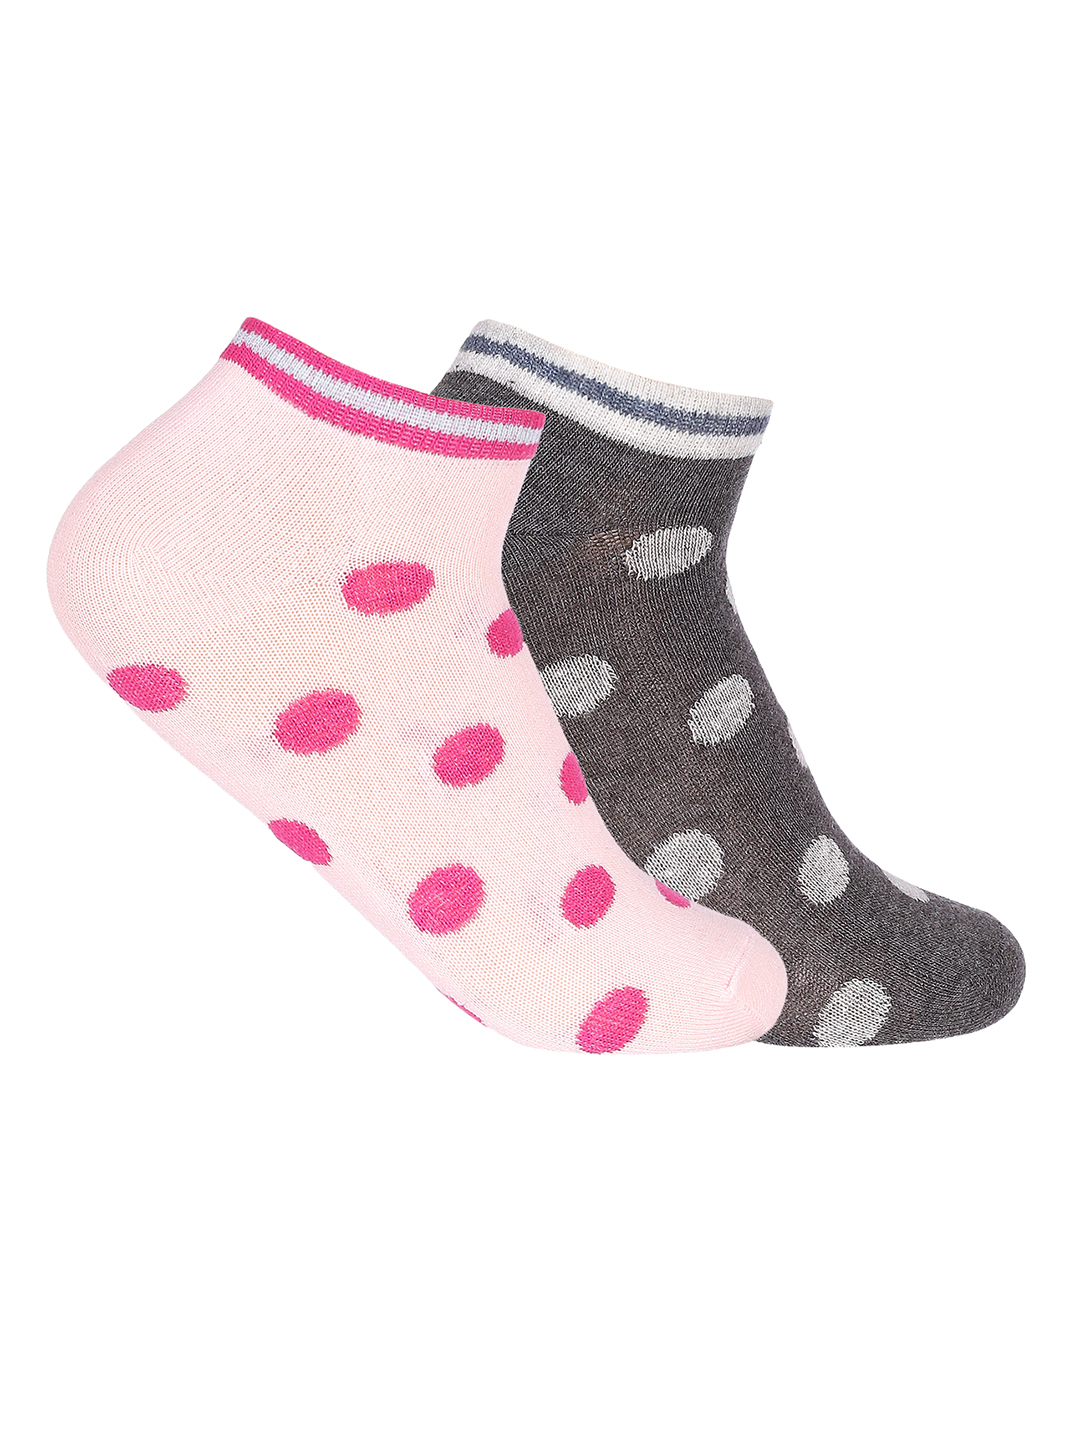 Women's Allover Polka Dots Cotton Low Ankle Socks